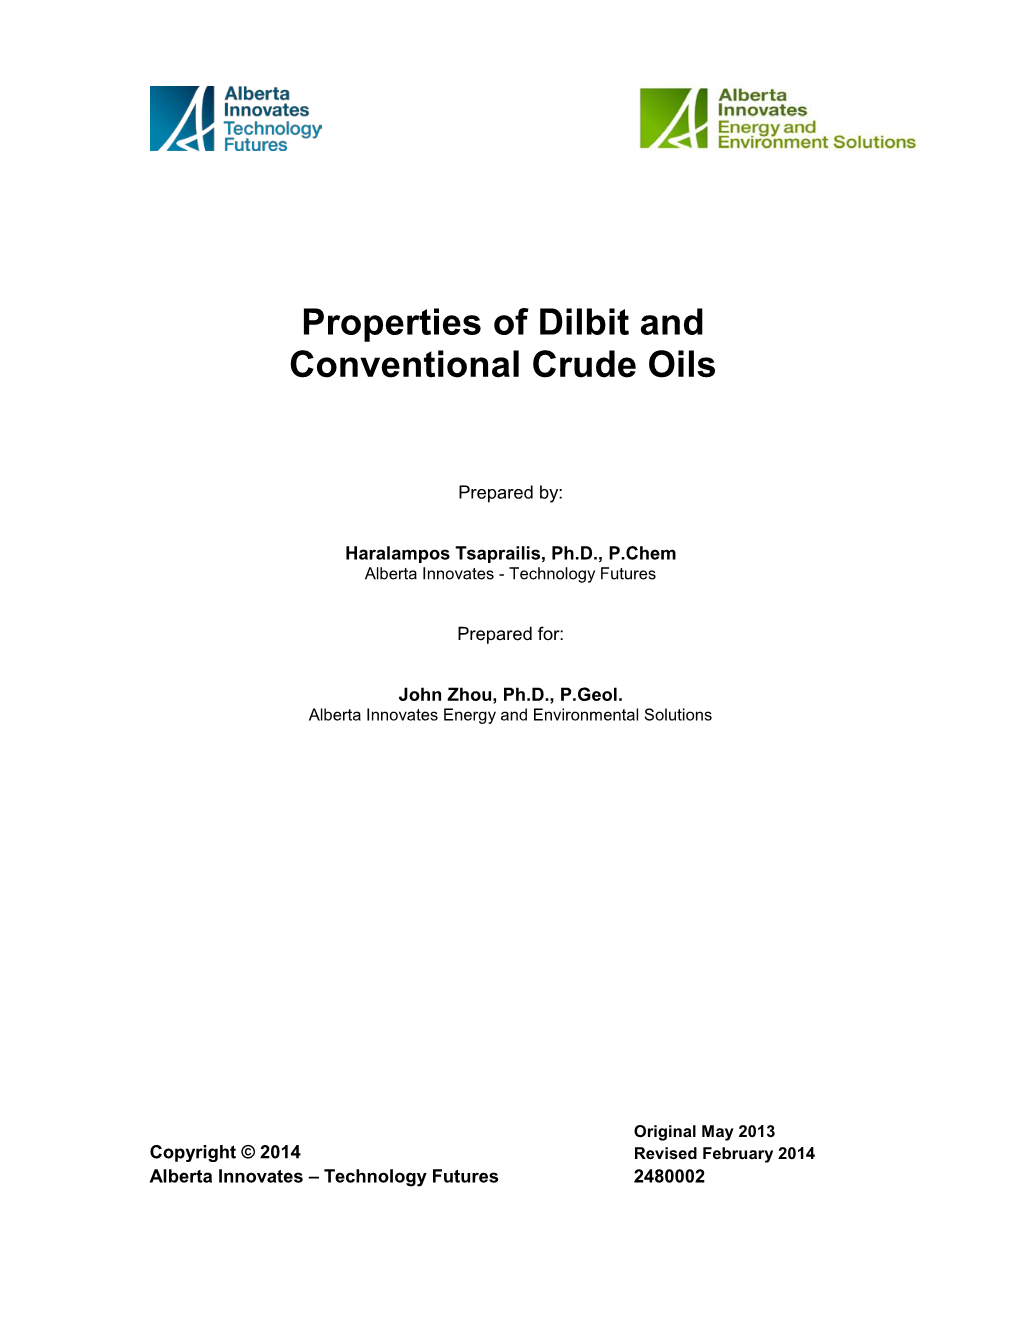 Properties of Dilbit and Conventional Crude Oils